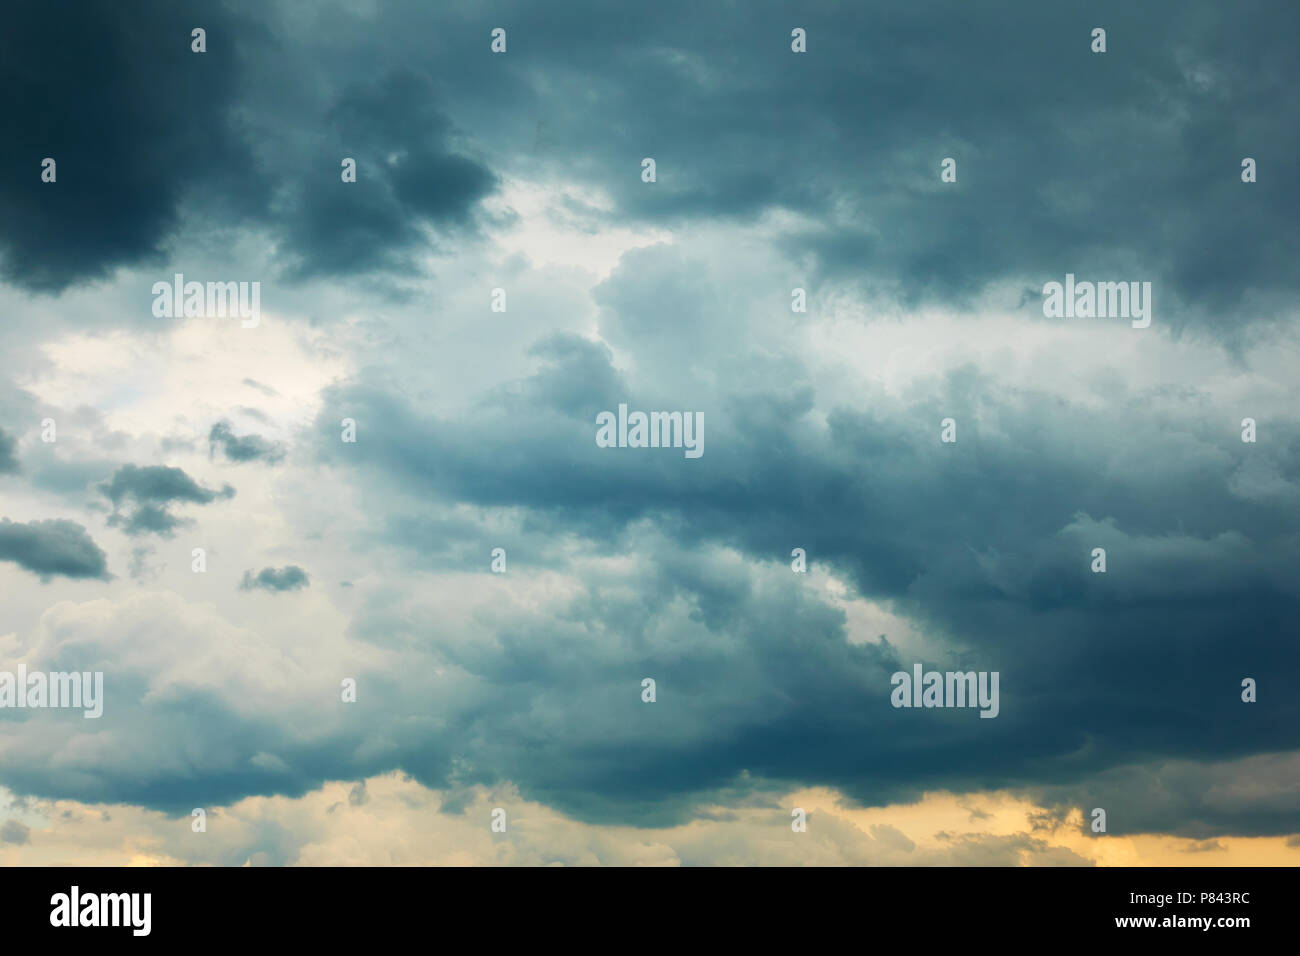 Dramatic stormy sky with heavy clouds, may be used as background Stock Photo